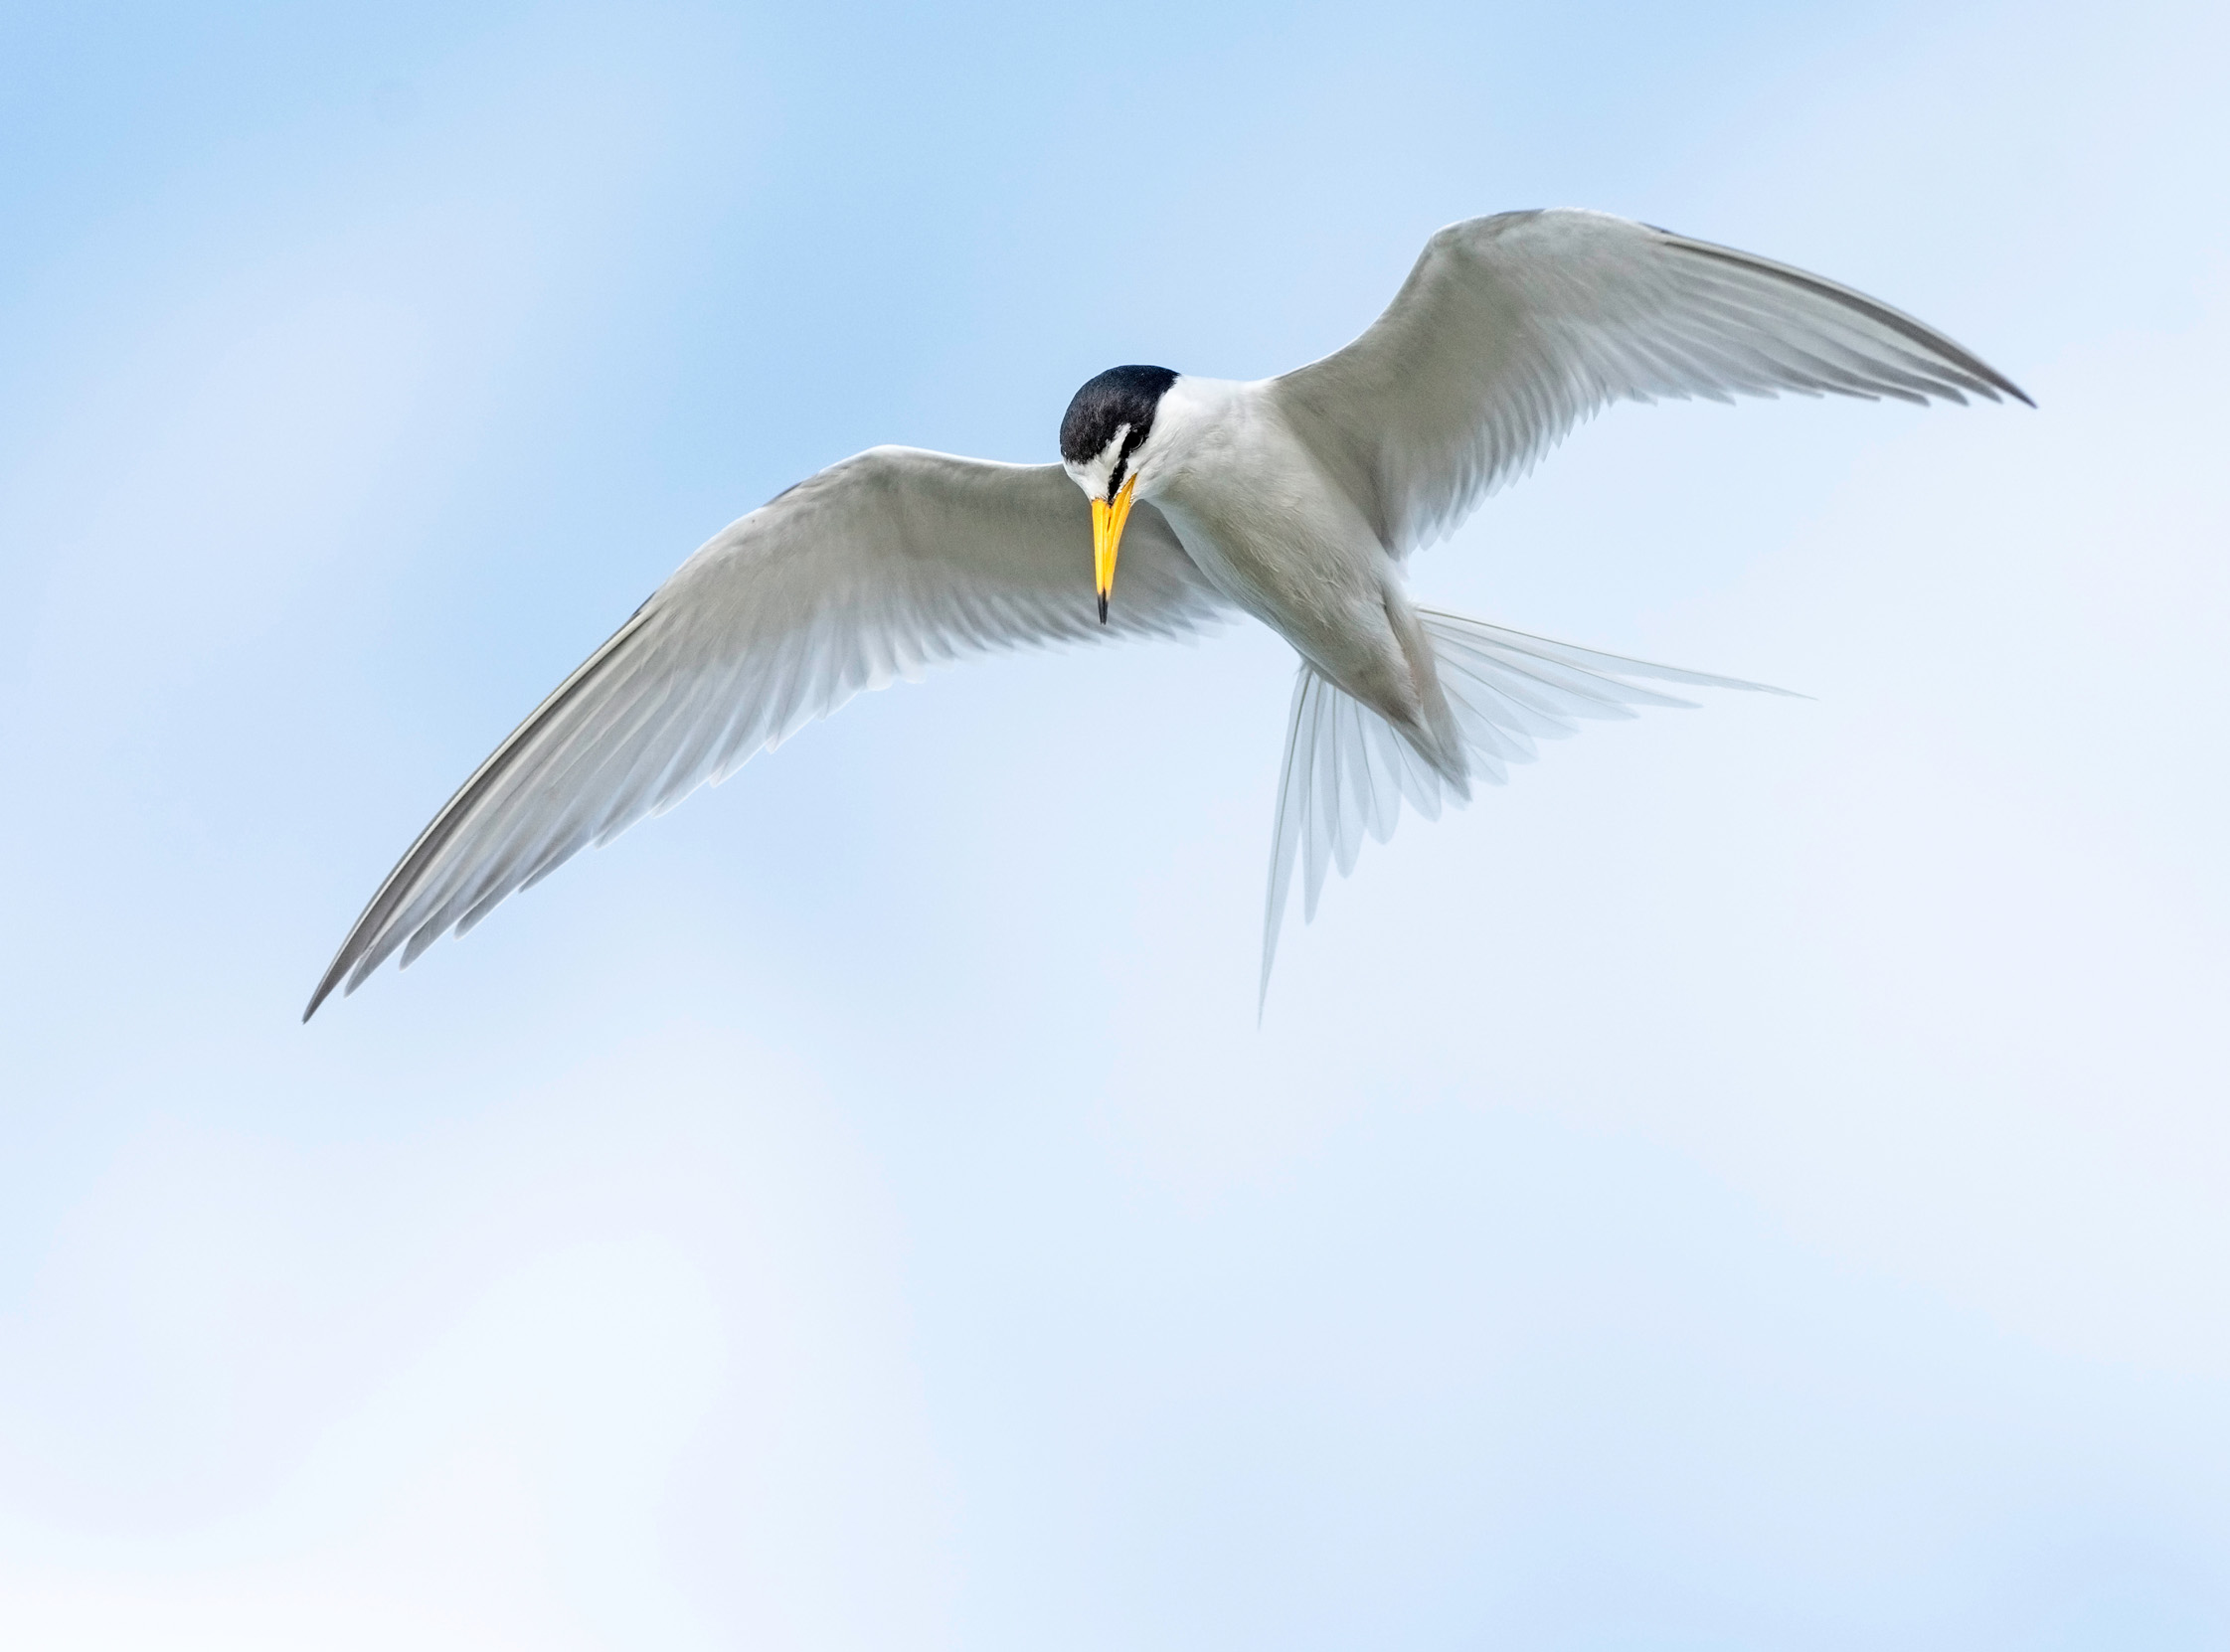 A lone Little Tern flying overhead against a blue cloudy sky.